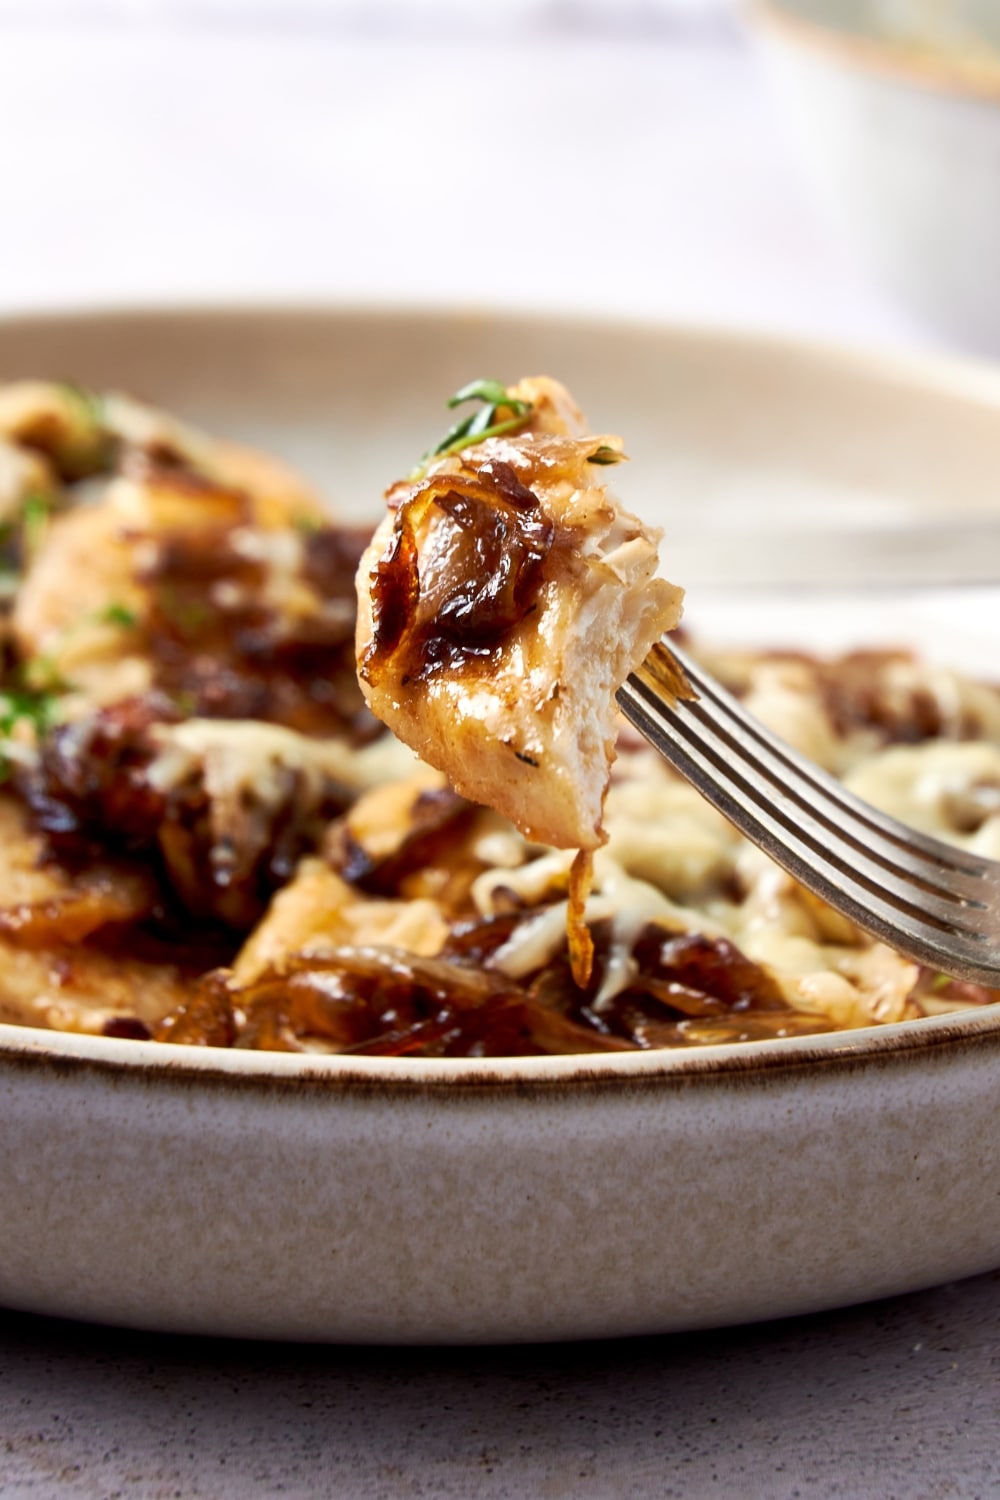 A closer look at a bite of French onion chicken on a fork.